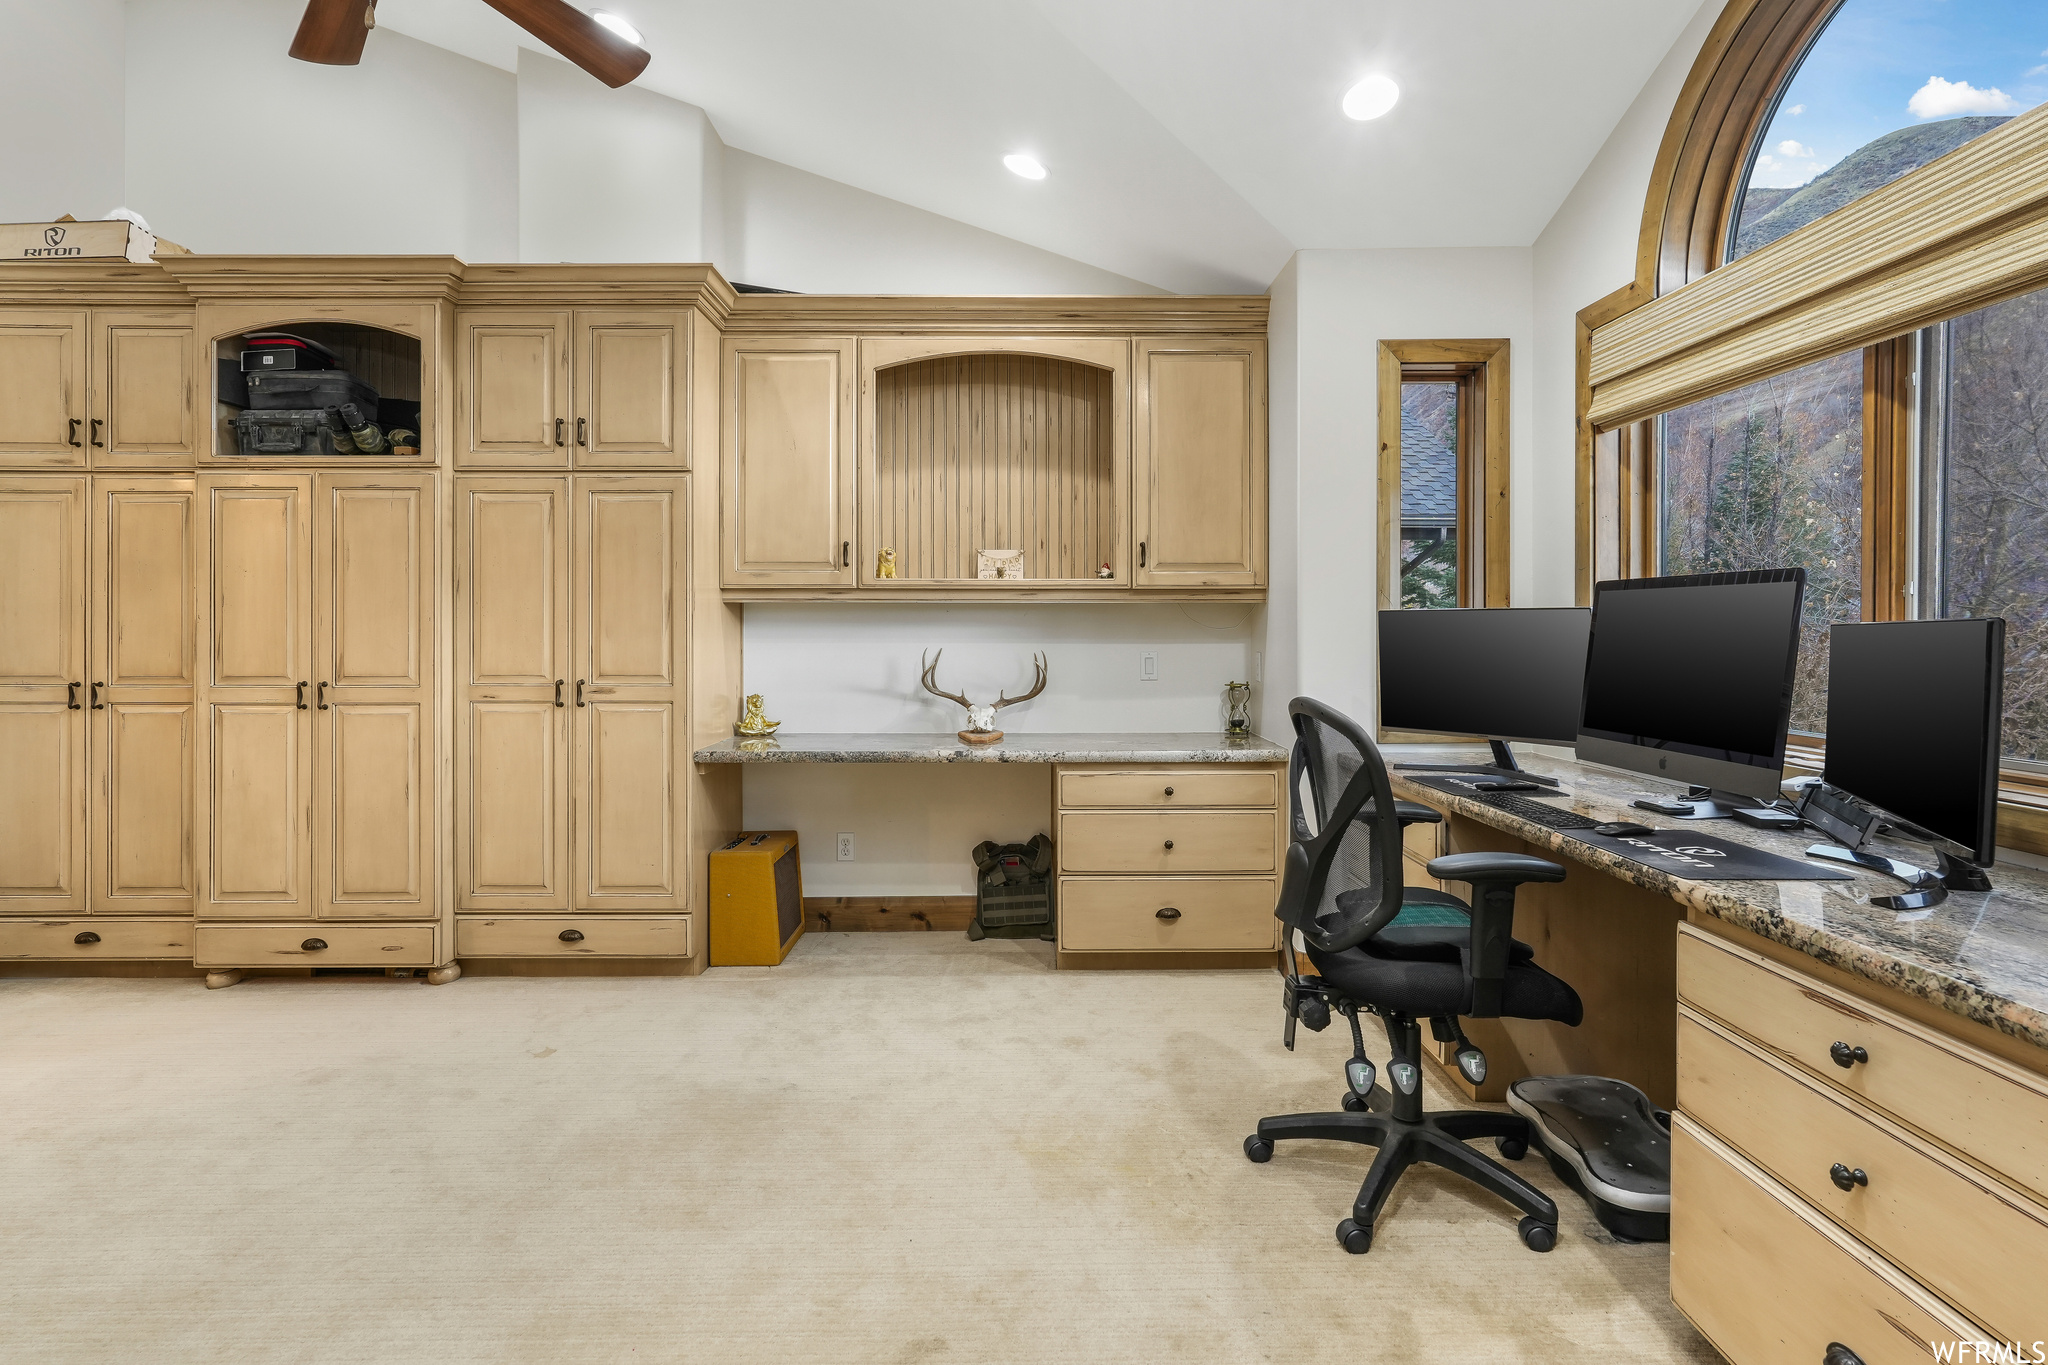 Carpeted office space with ceiling fan, built in desk, and vaulted ceiling